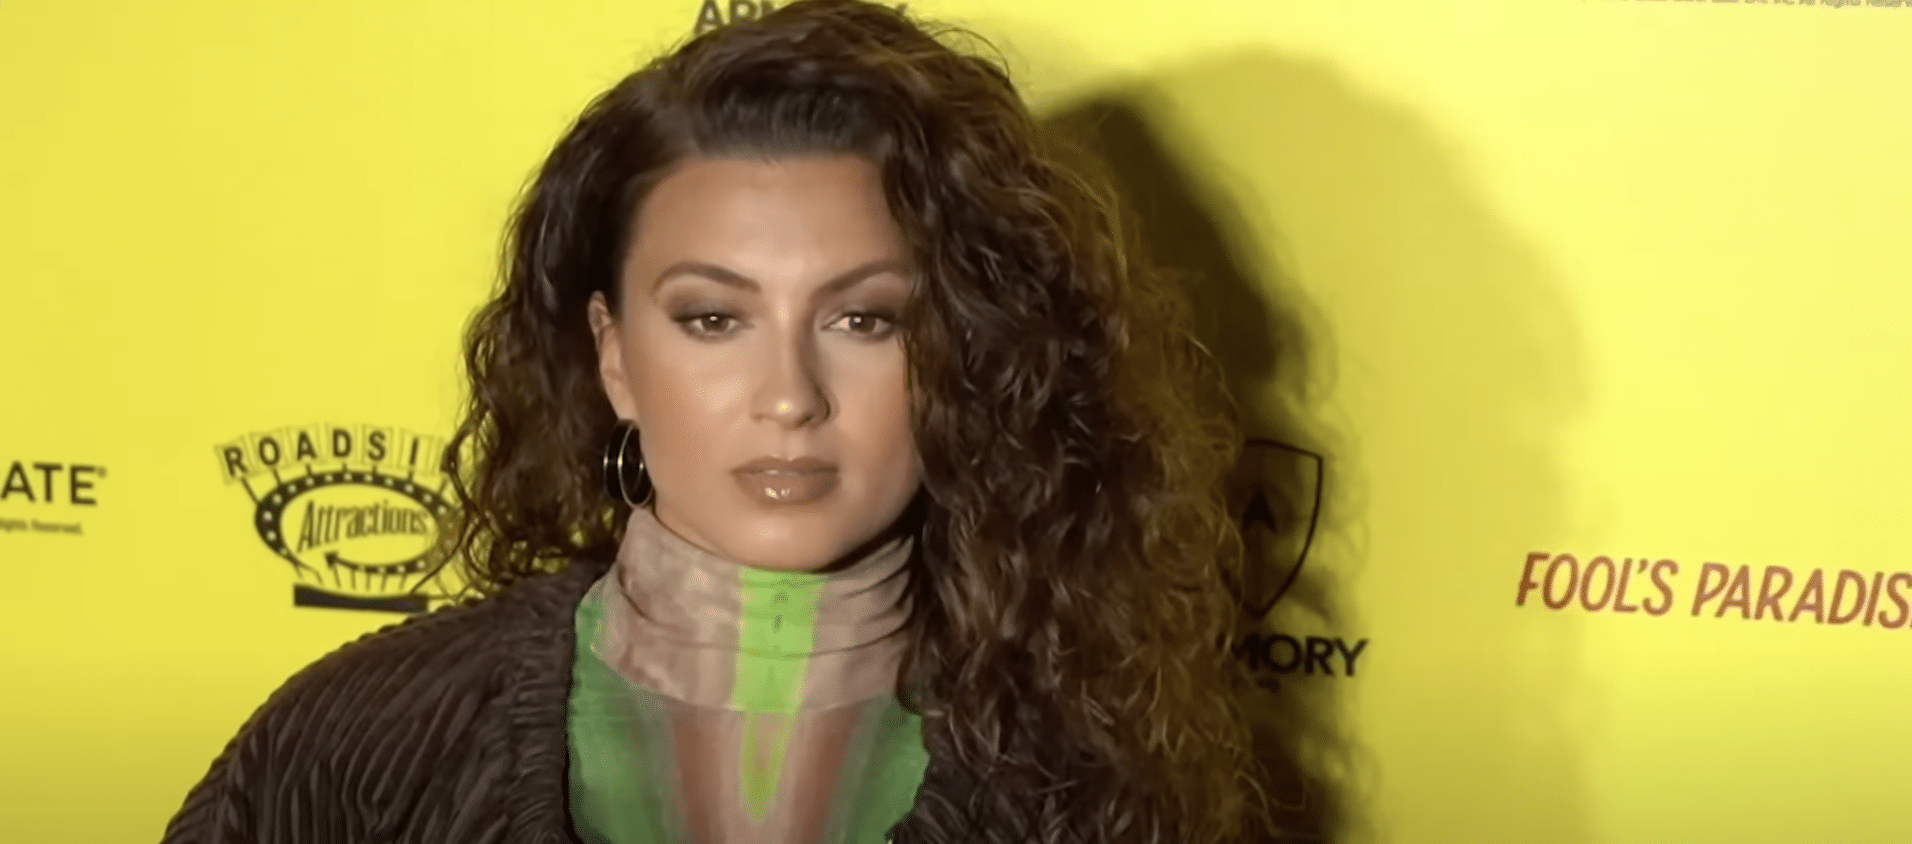 30 Year-Old Tori Kelly hospitalized for blood clots after collapsing in public